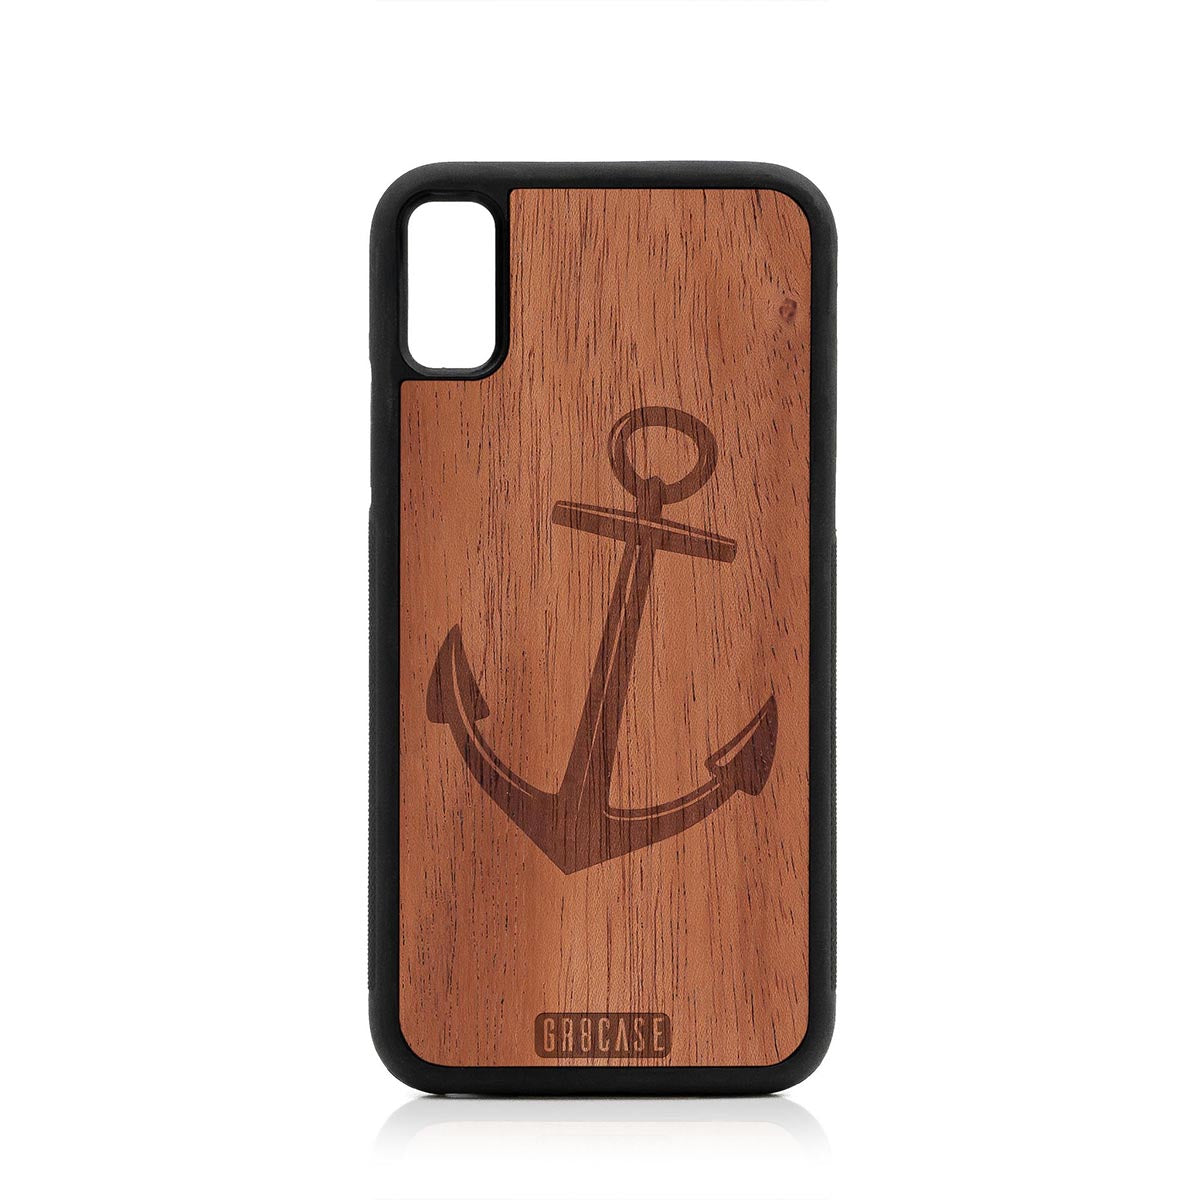 Anchor Design Wood Case For iPhone XS Max by GR8CASE